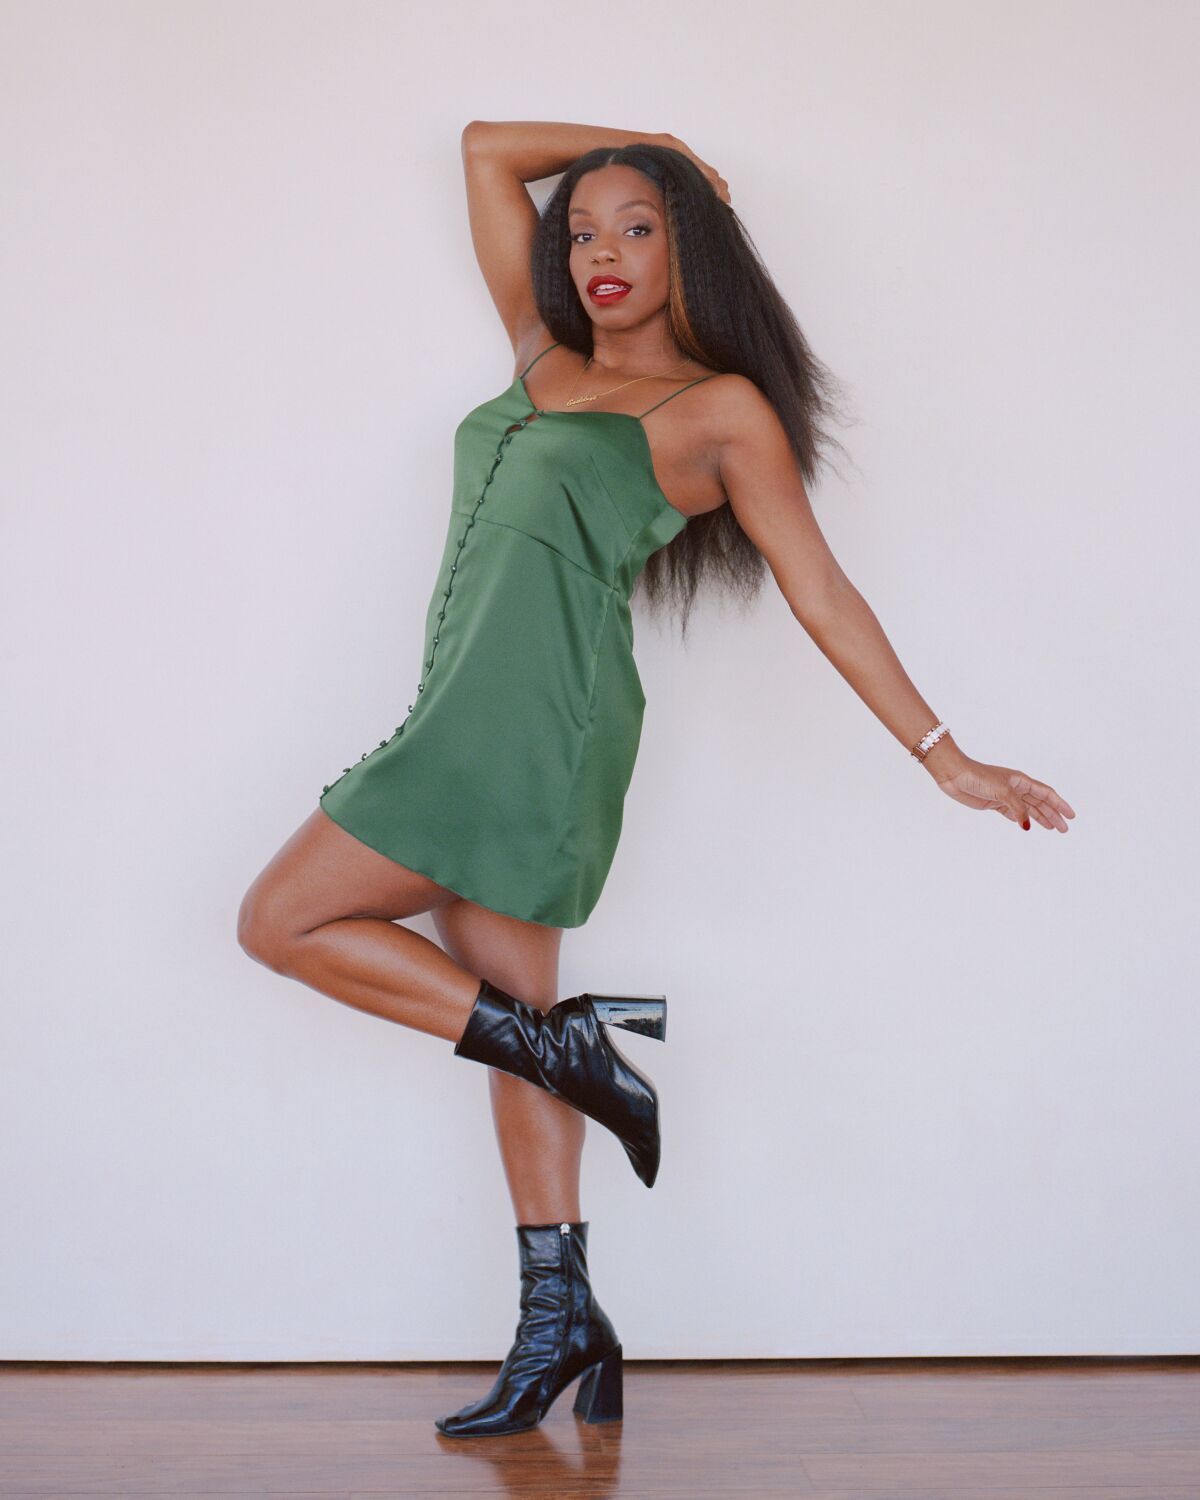 A woman strikes a pose in a green dress and black boots.